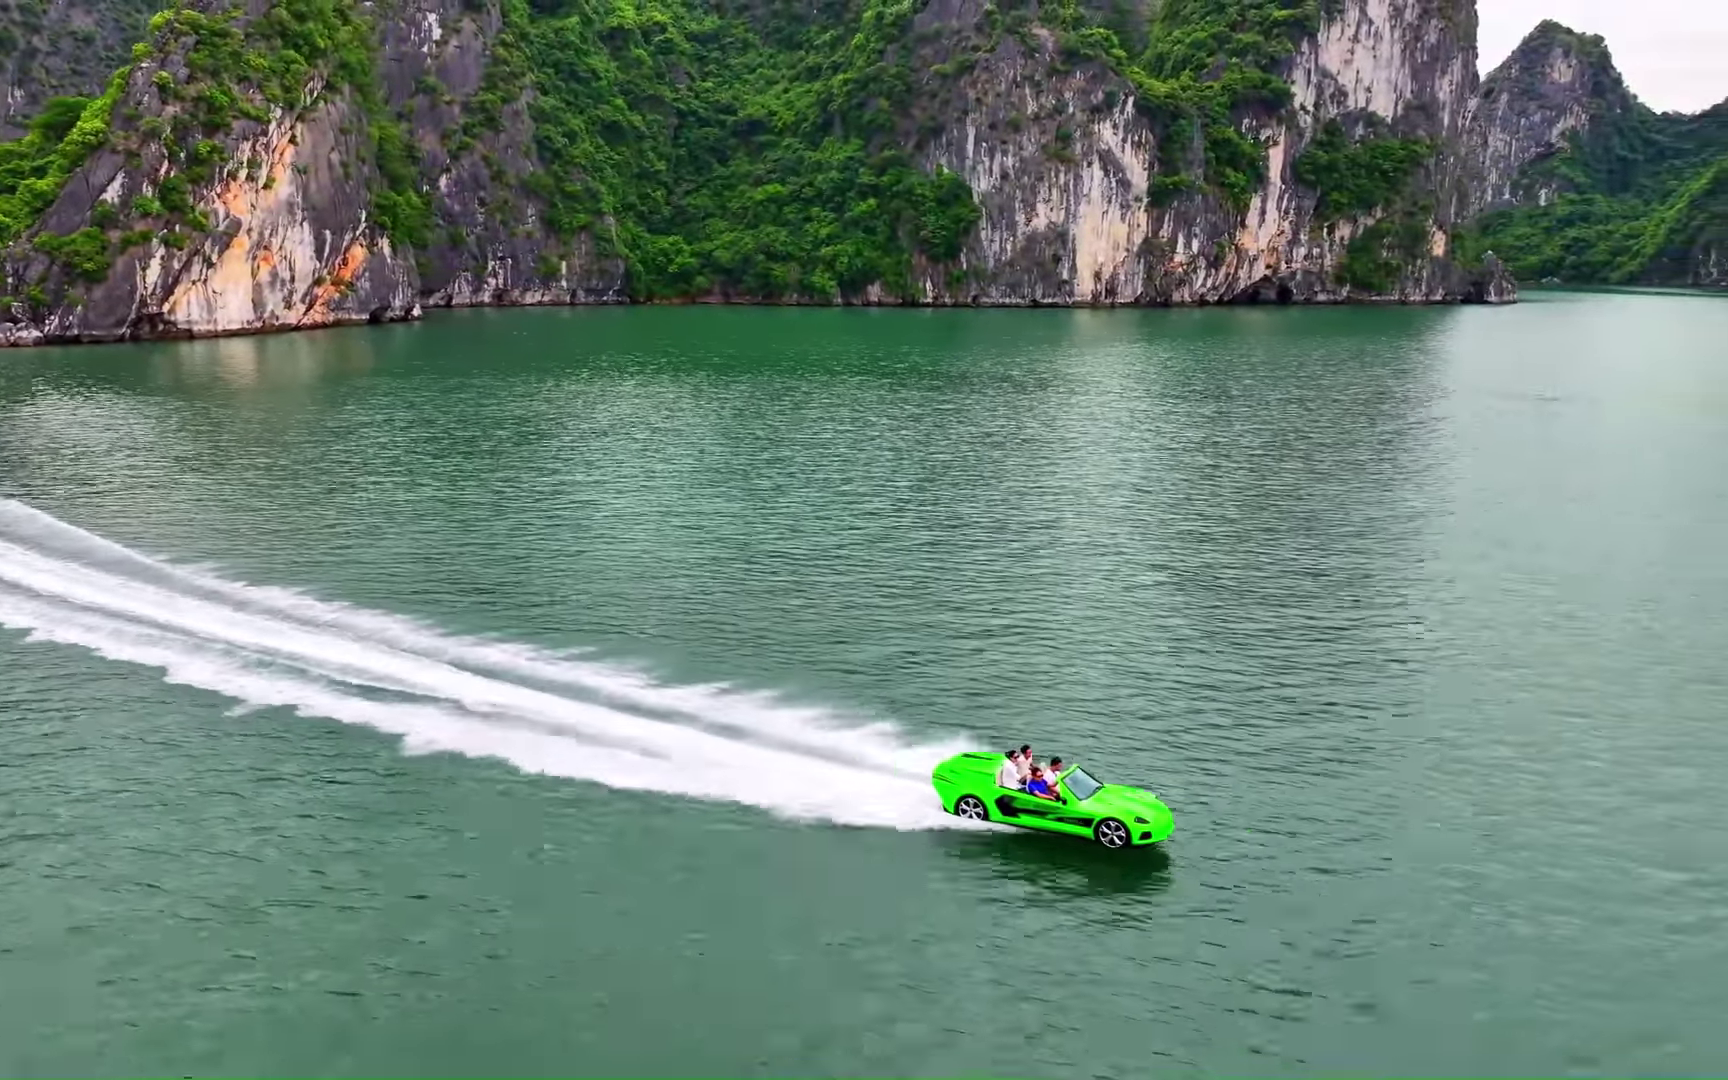 Although the occupants of the supercar were speeding across the surface of Ha Long Bay, no one was wearing a life jacket - Photo: Cut from video